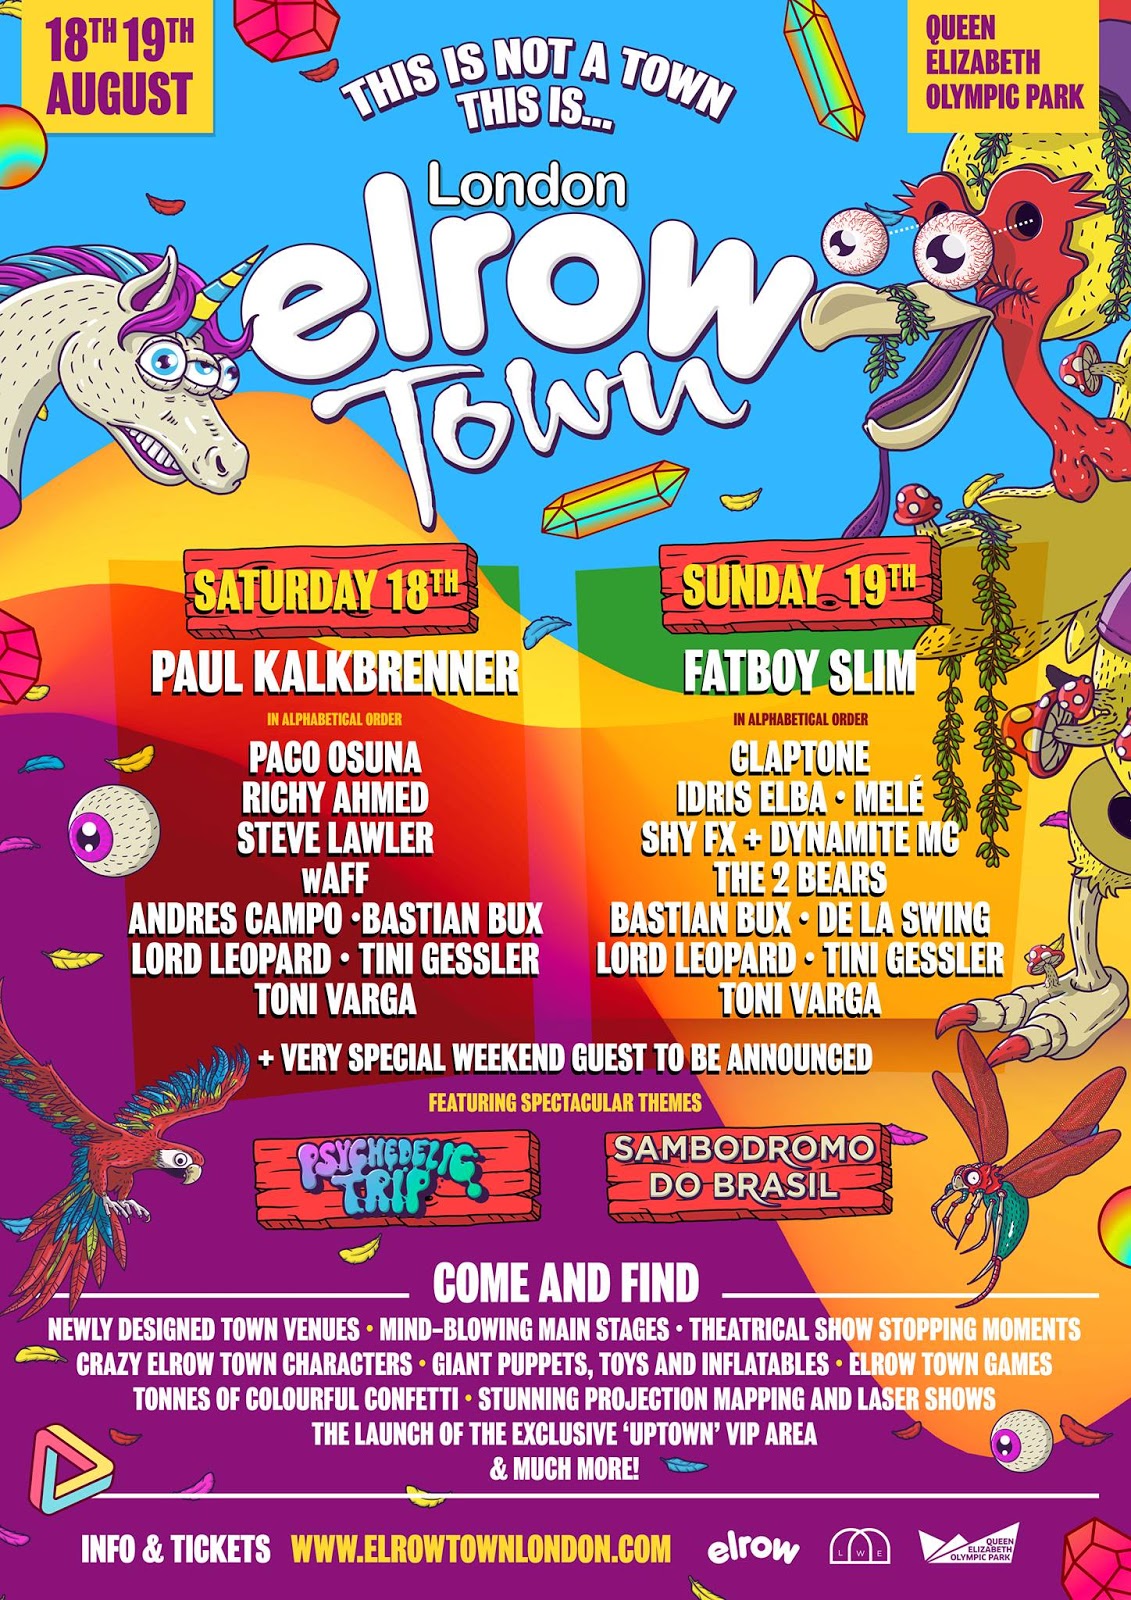 Lineup confirmed for elrow Town London, 1819th August